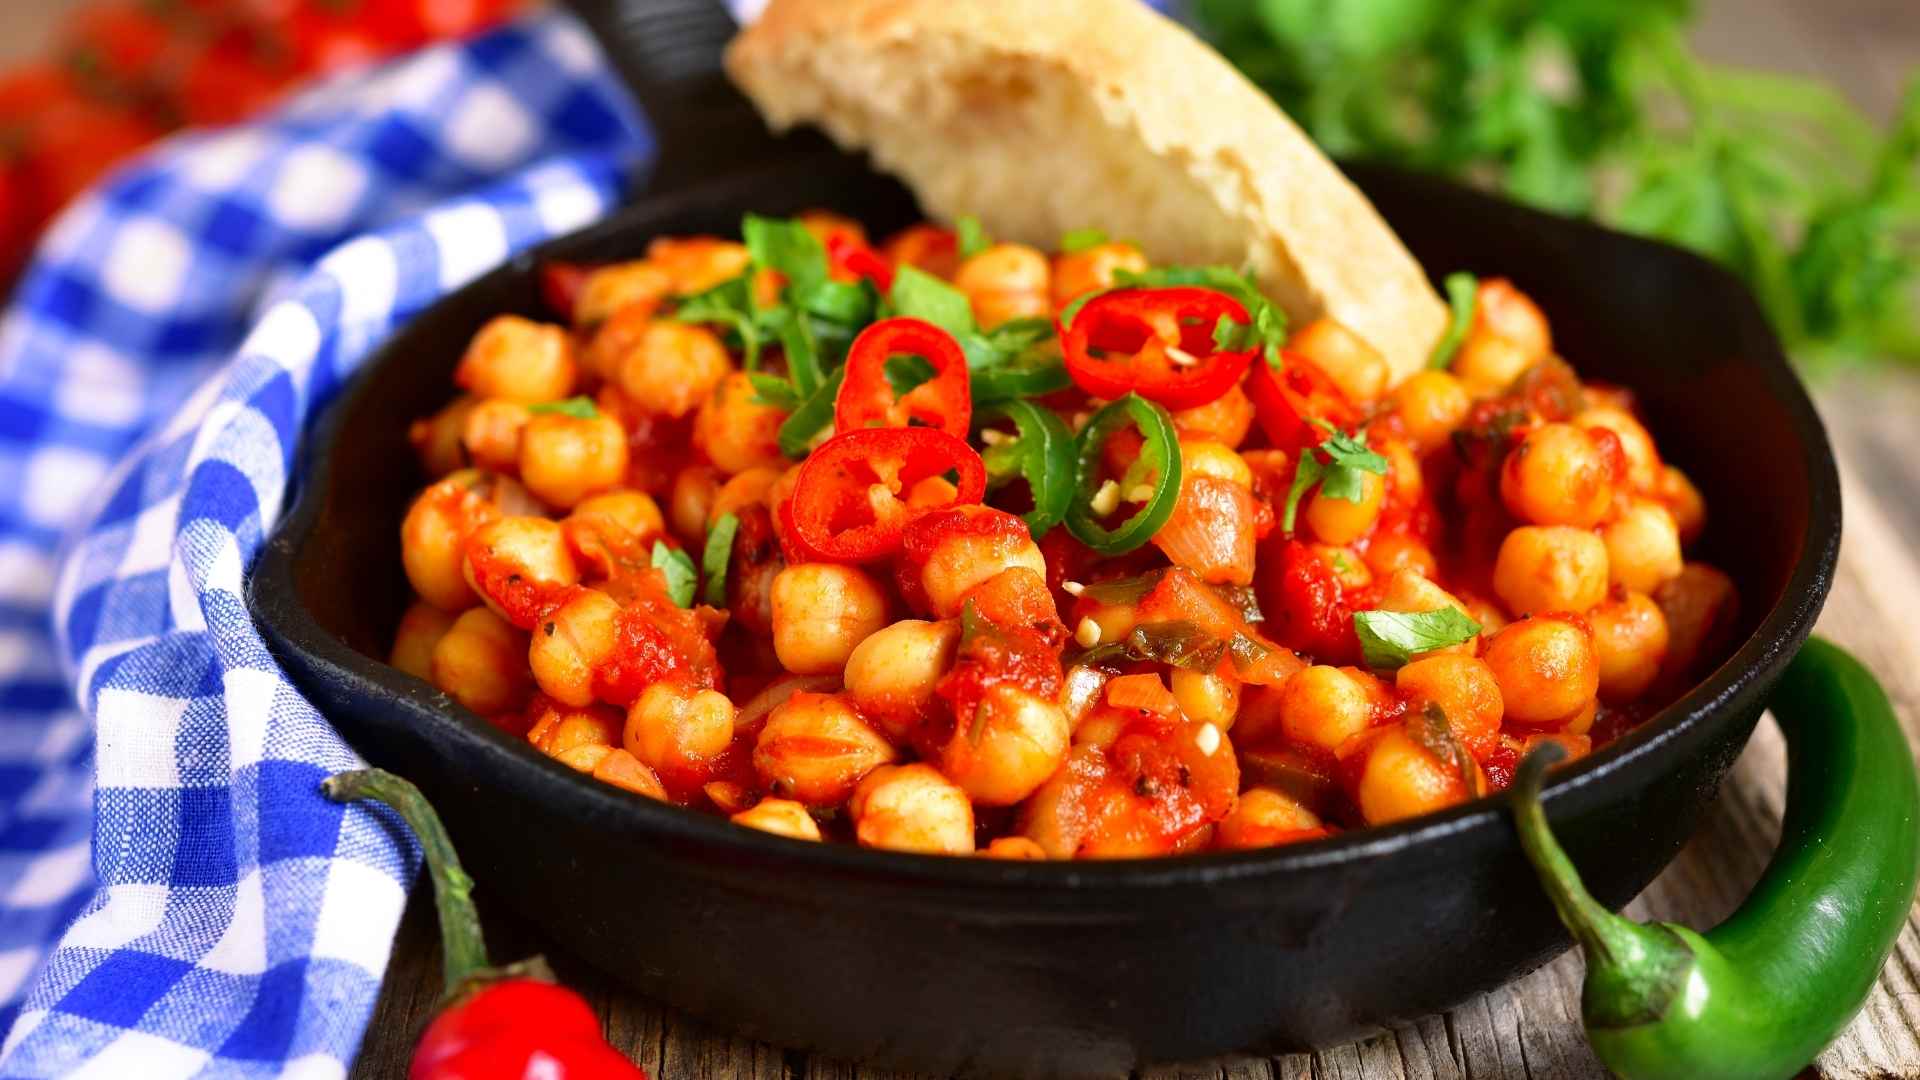 Warm Your Soul with This Hearty Chickpea Stew Recipe - A Delicious and Nutritious Plant-Based Meal 3